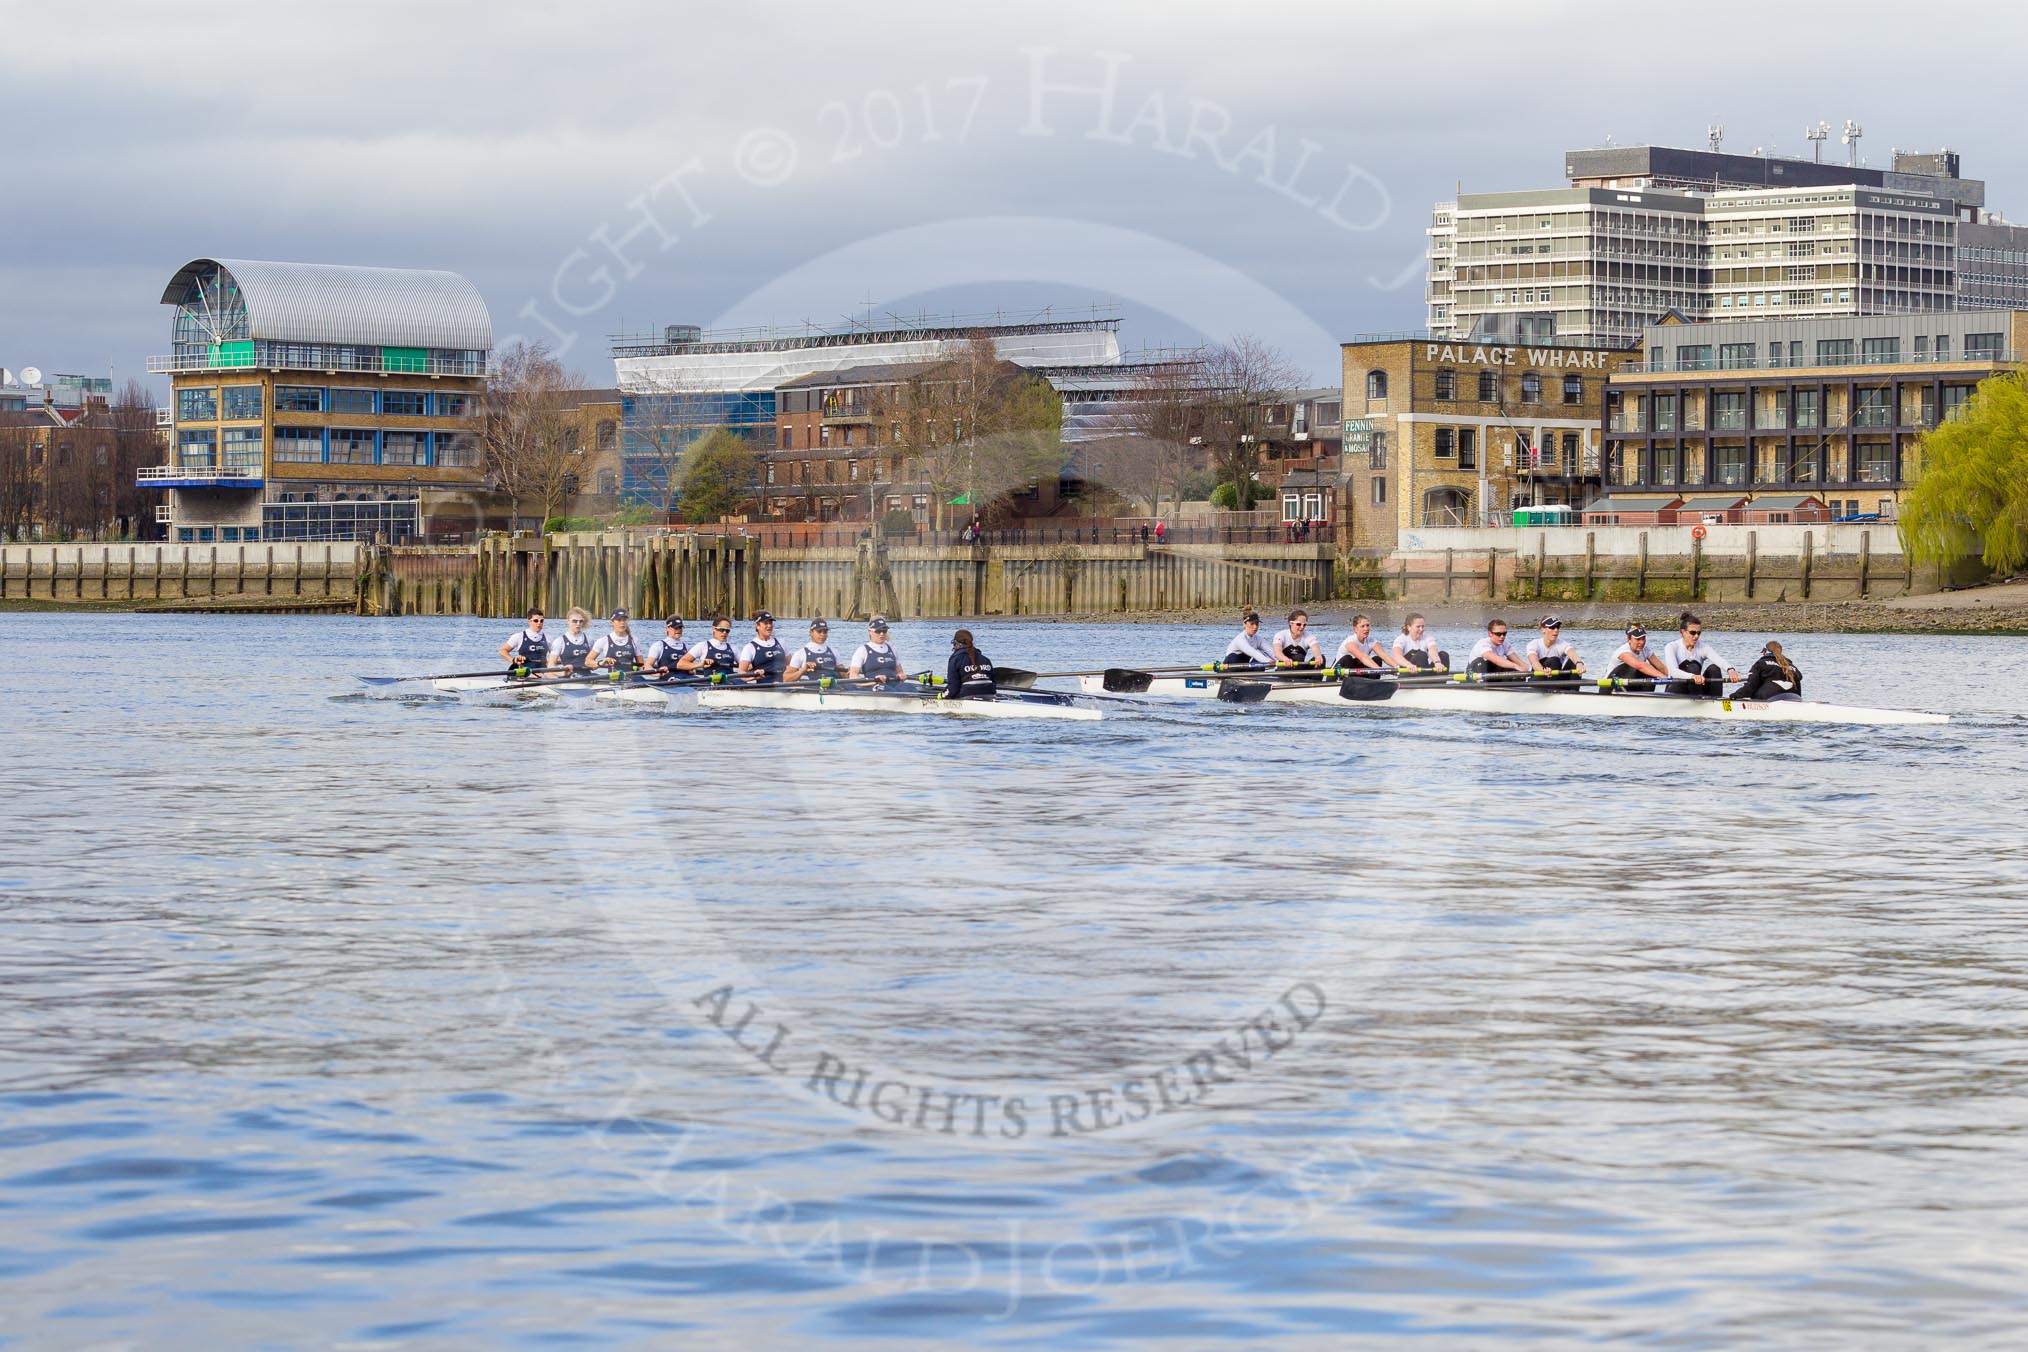 The Cancer Research UK Boat Race season 2017 - Women's Boat Race Fixture OUWBC vs Molesey BC: OUWBC extending their lead further at Palace Wharf.
River Thames between Putney Bridge and Mortlake,
London SW15,

United Kingdom,
on 19 March 2017 at 16:05, image #80